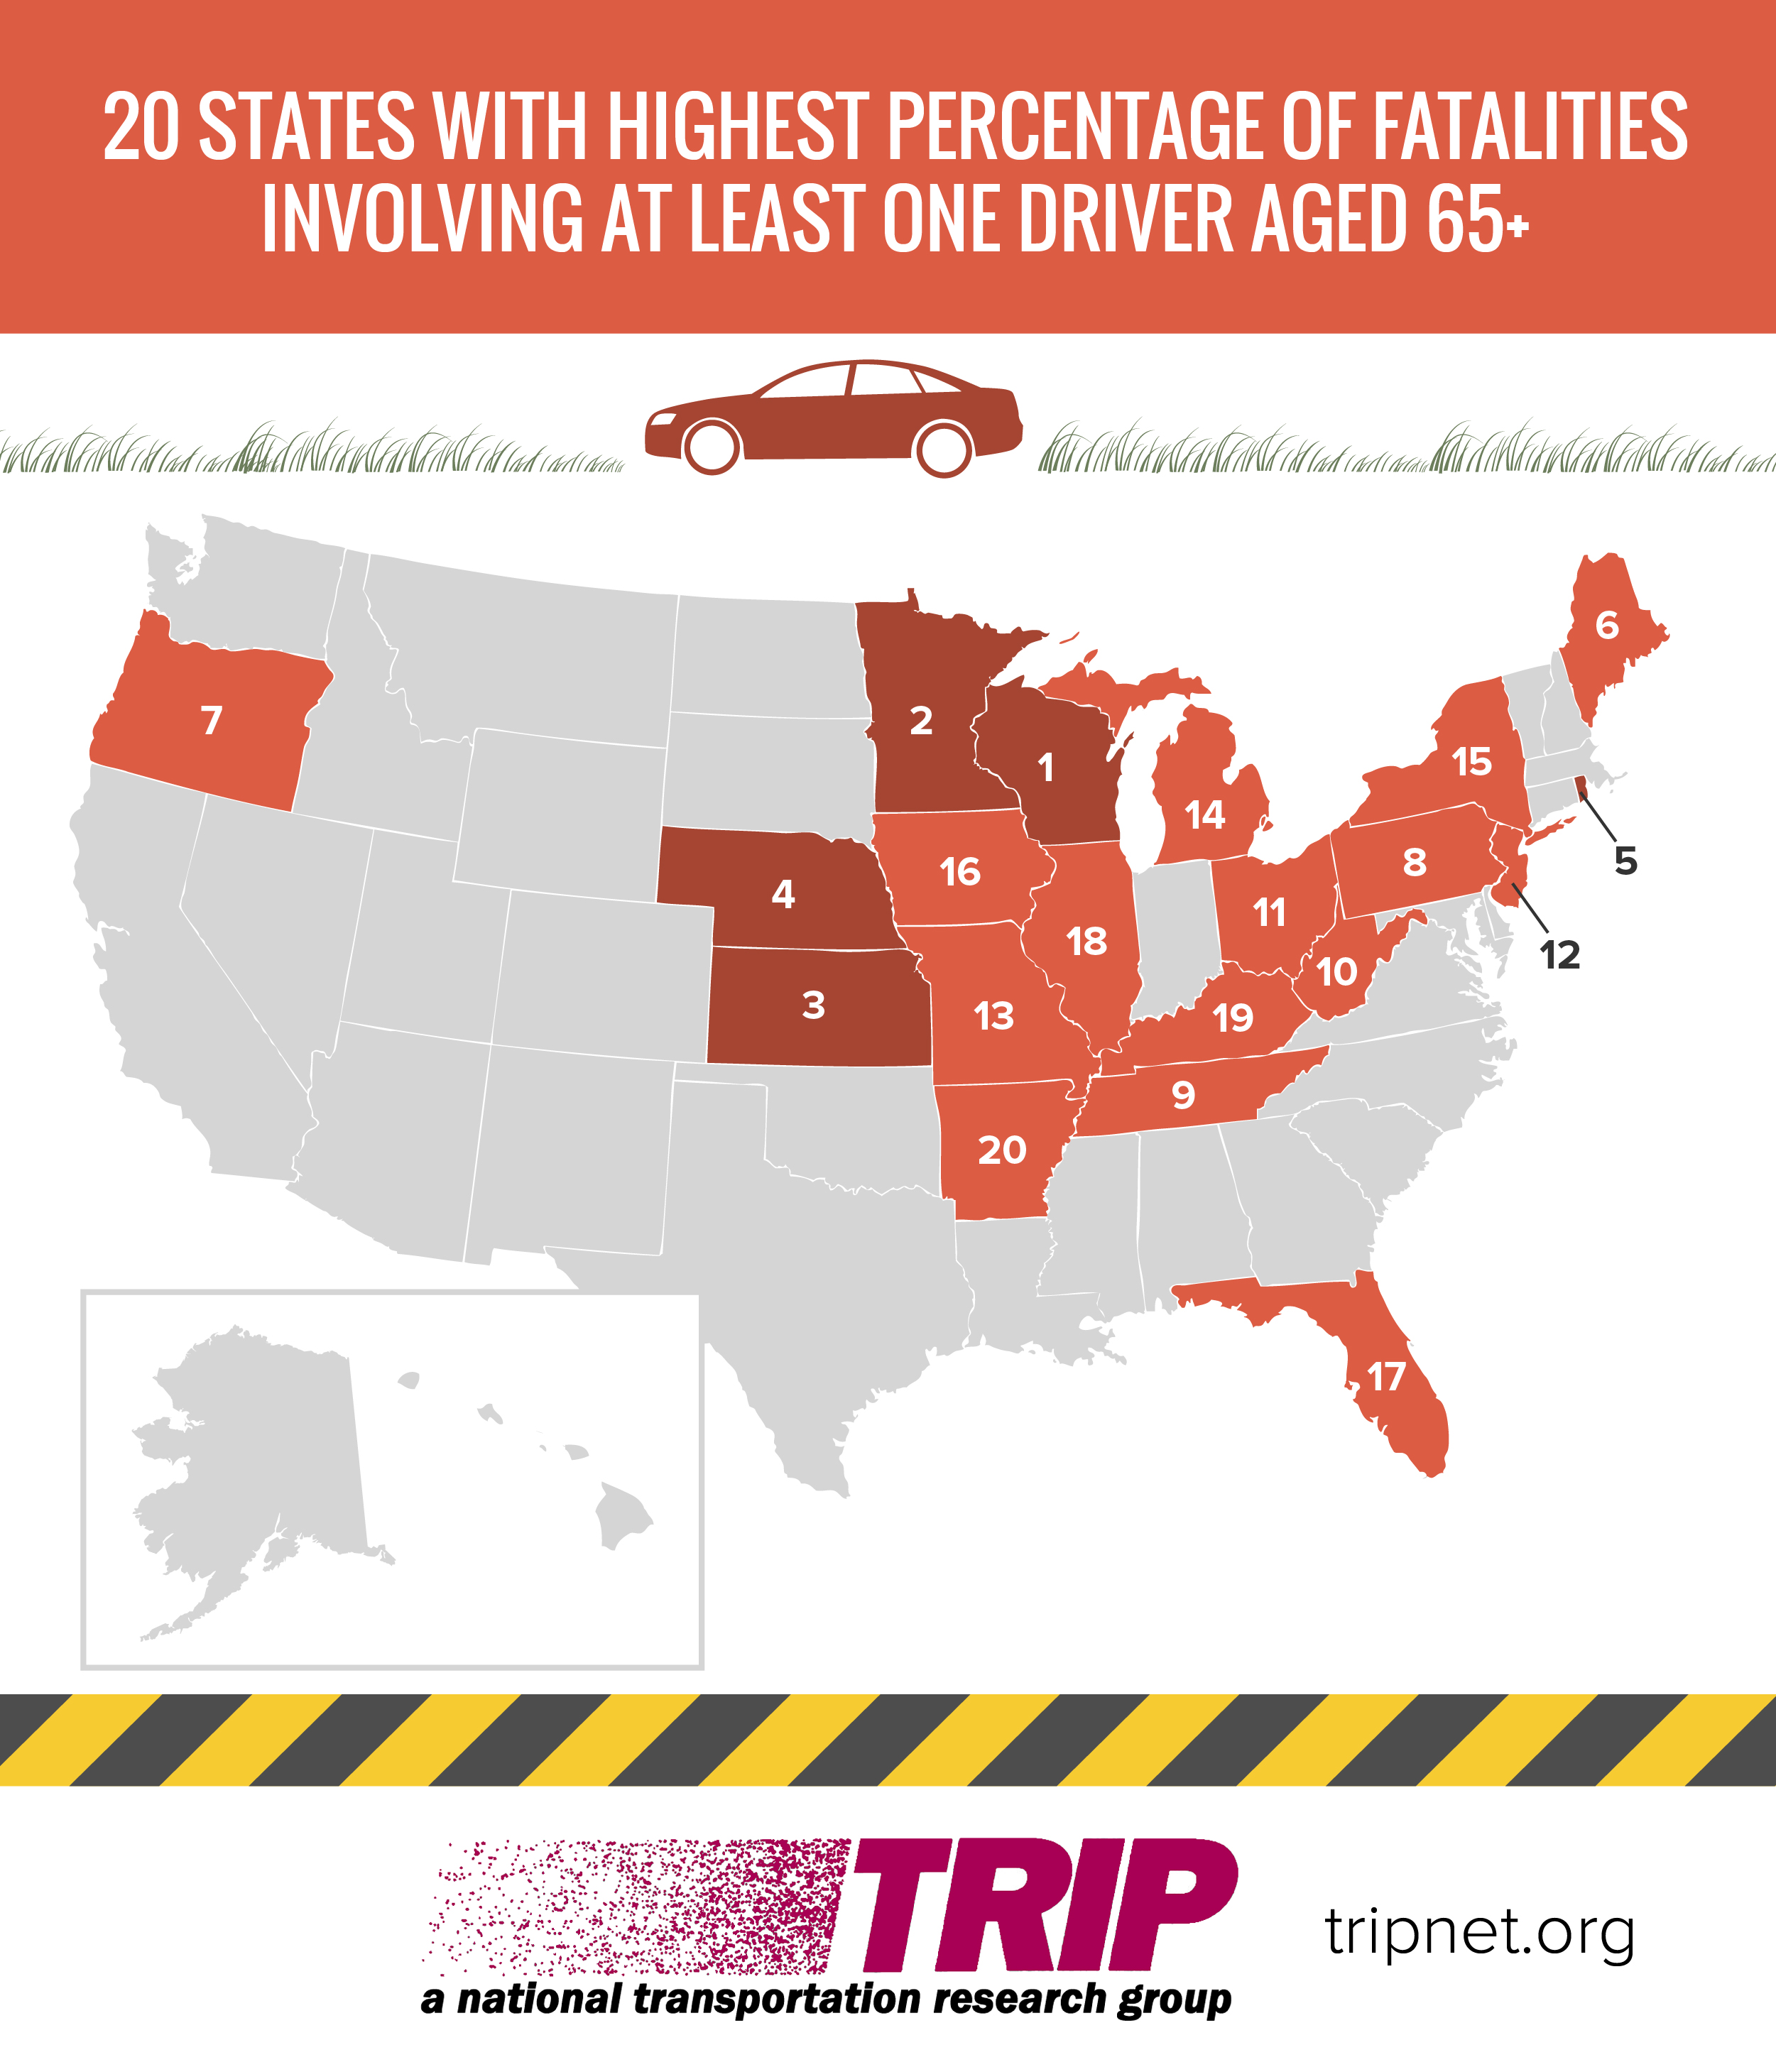 20 States with Highest Percentage of Fatalities Involving at Least One Driver Aged 65+